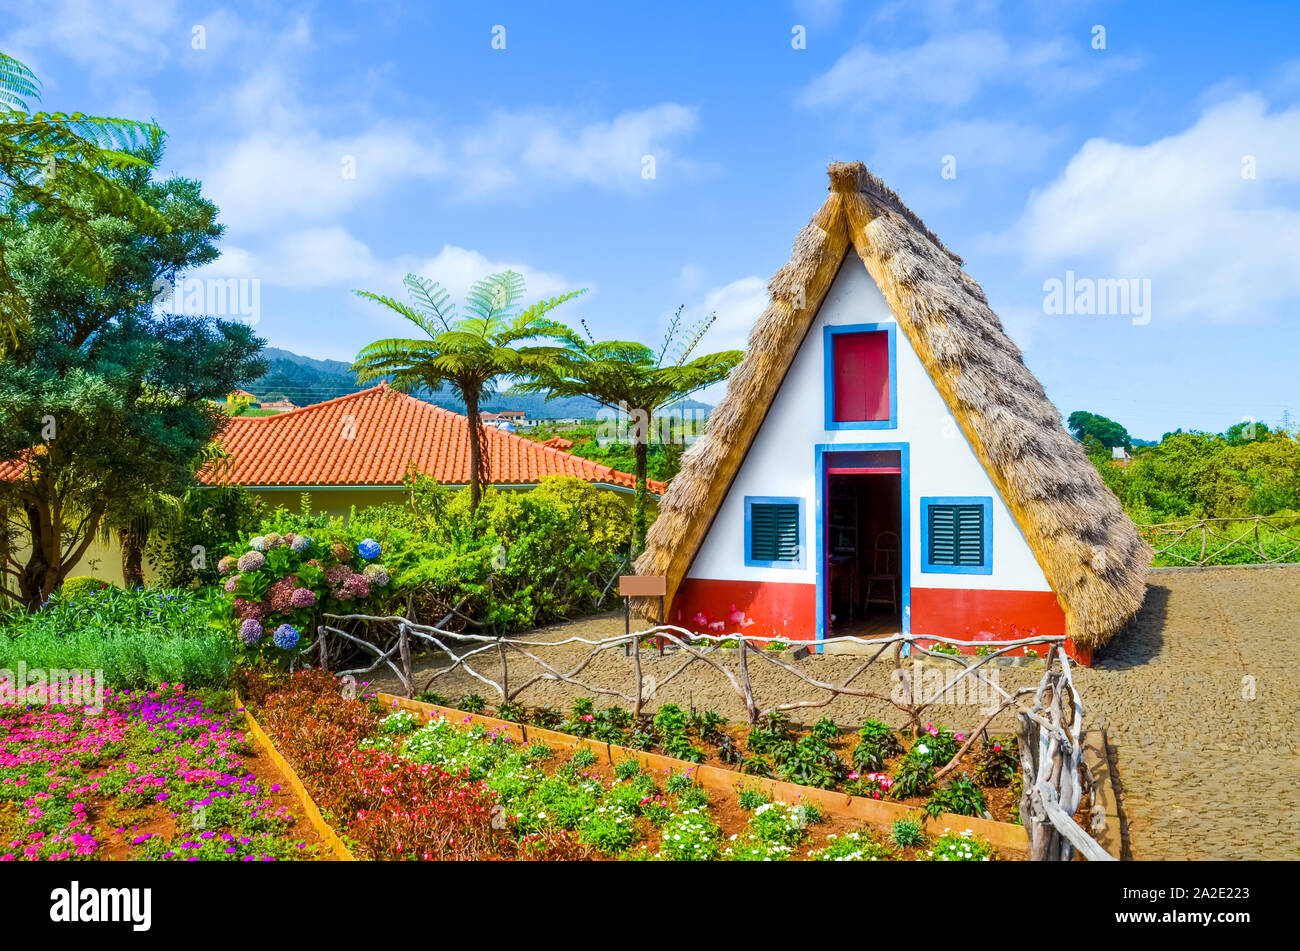 Old traditional houses in Santana, Madeira Island, Portugal. Wooden, small, triangular and colorful houses represent a part of Madeira heritage. Surrounded by flowers. Tourist attraction. Stock Photo